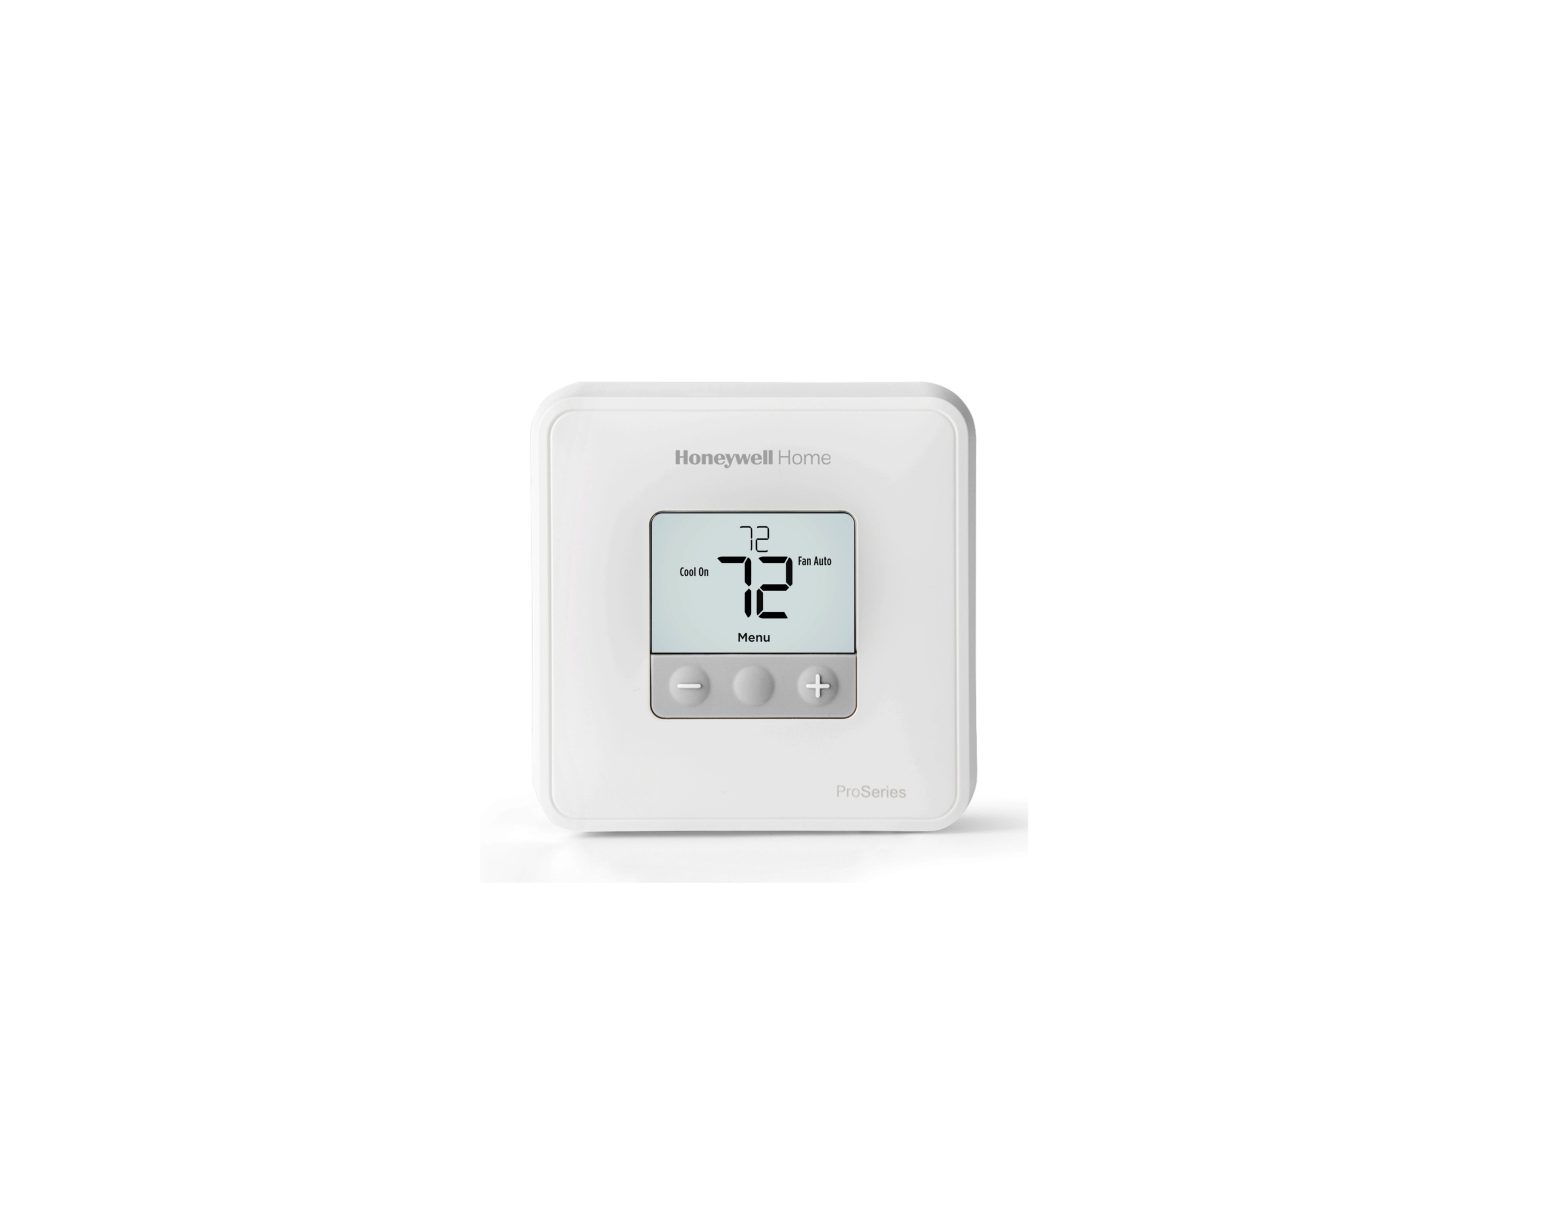 Honeywell T1 Pro Non-Programmable Thermostat User Guide